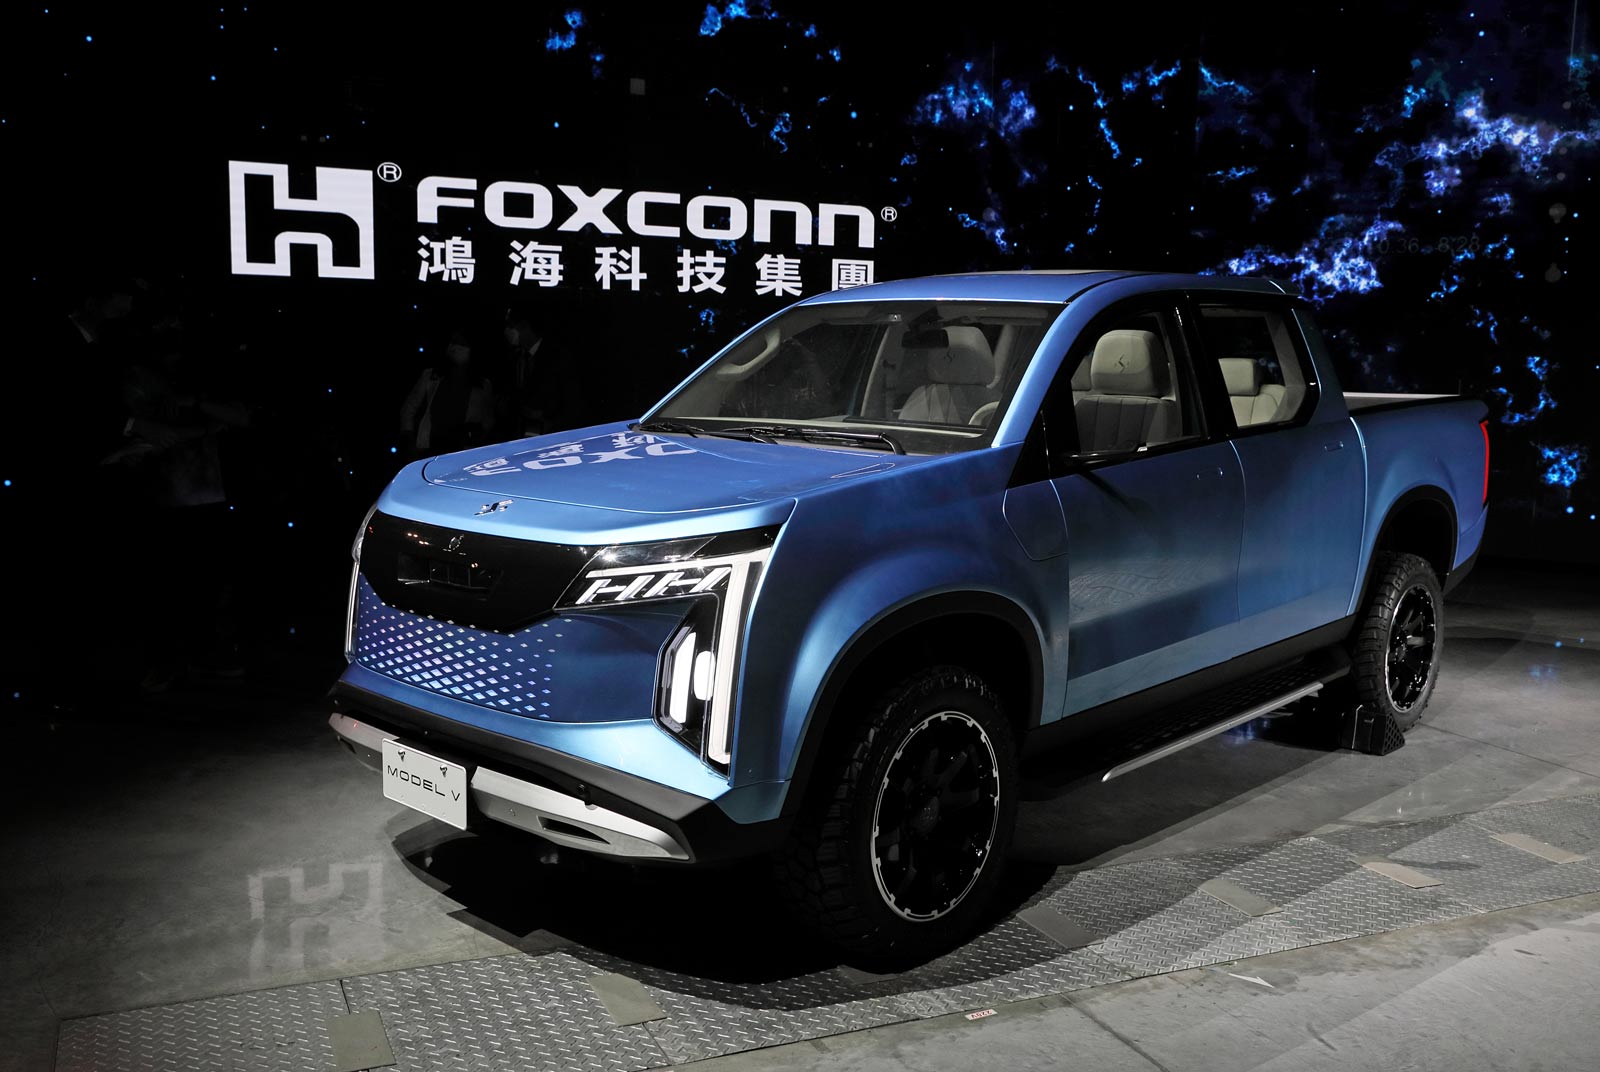 Does Foxconn want to make electric vehicles?